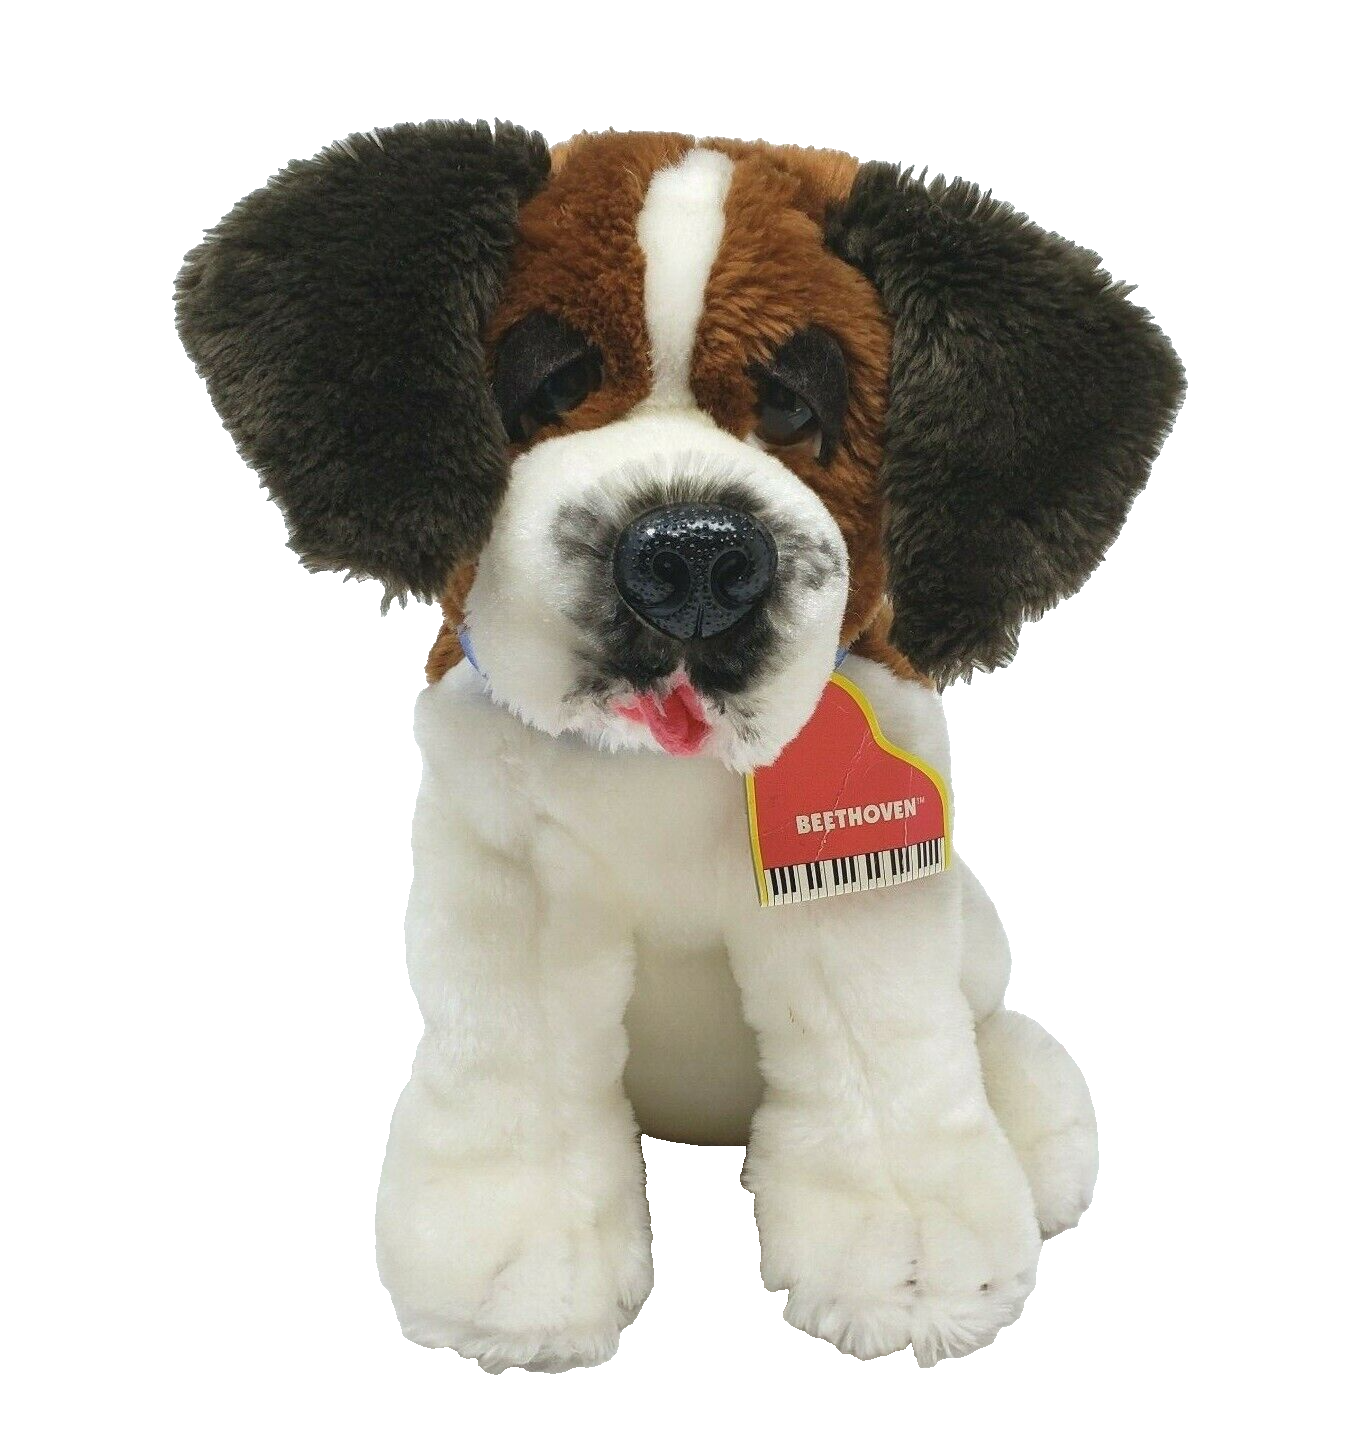 VINTAGE 1993 KENNER BEETHOVEN'S 2ND SECOND PUPPY DOG STUFFED ANIMAL PLUSH TOY - $56.05